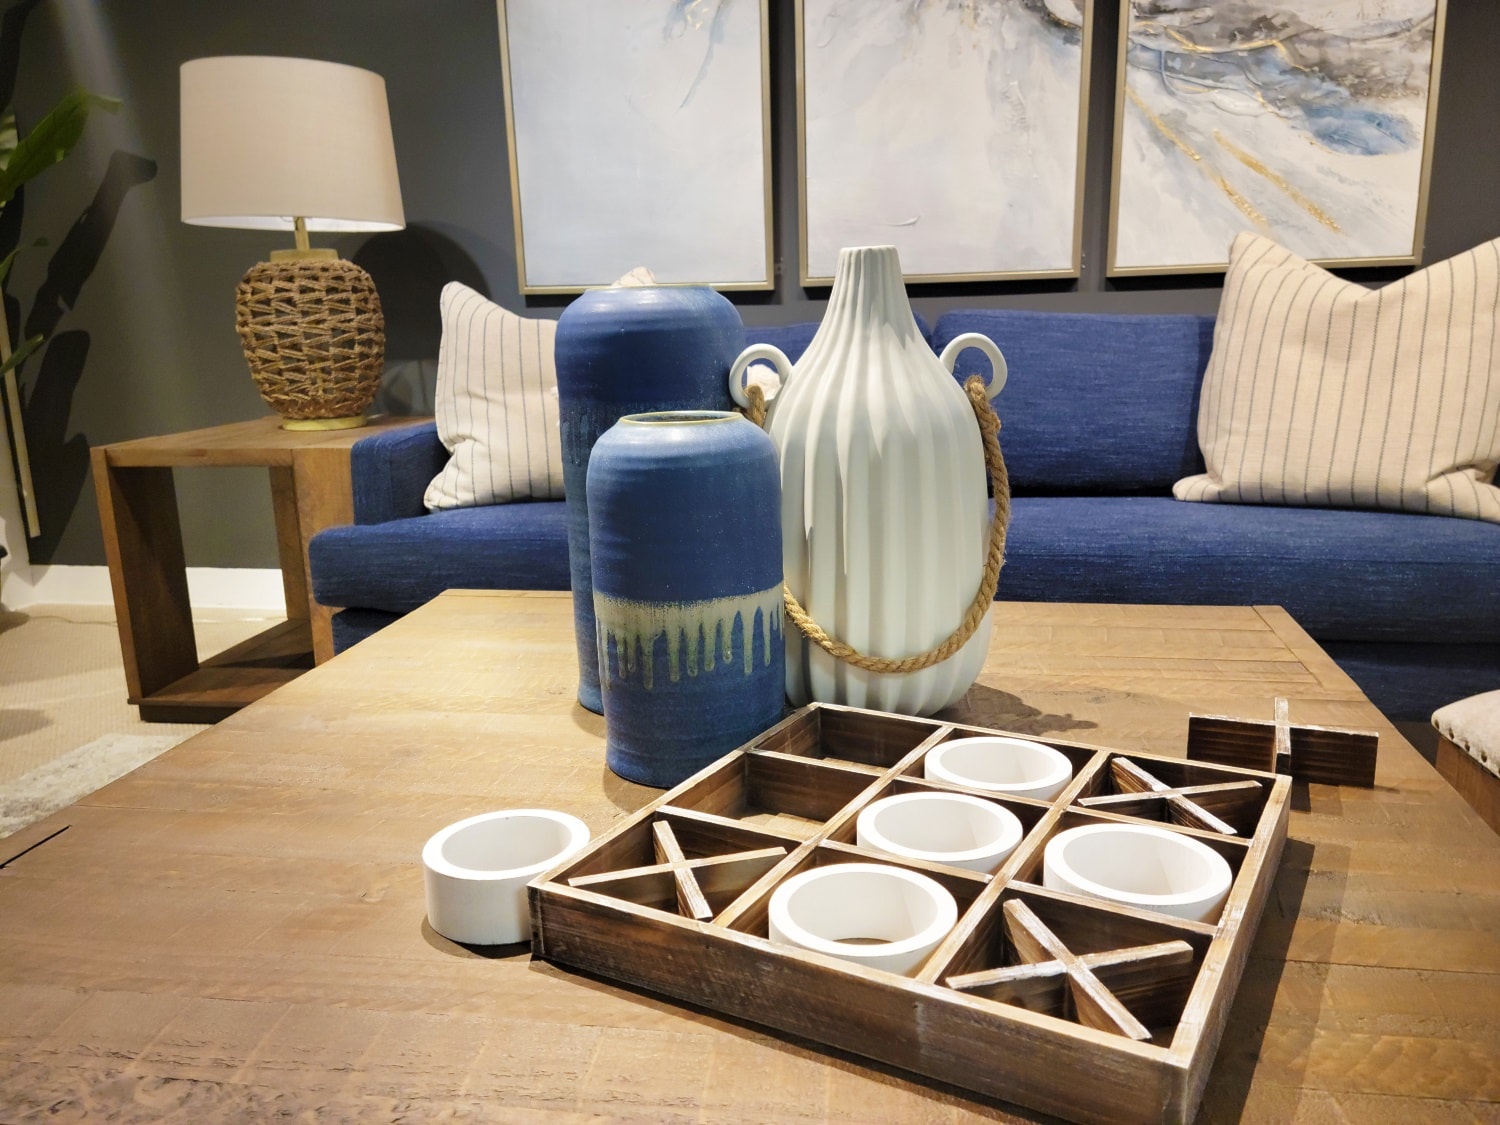 Coffee Tables with Games & Vases